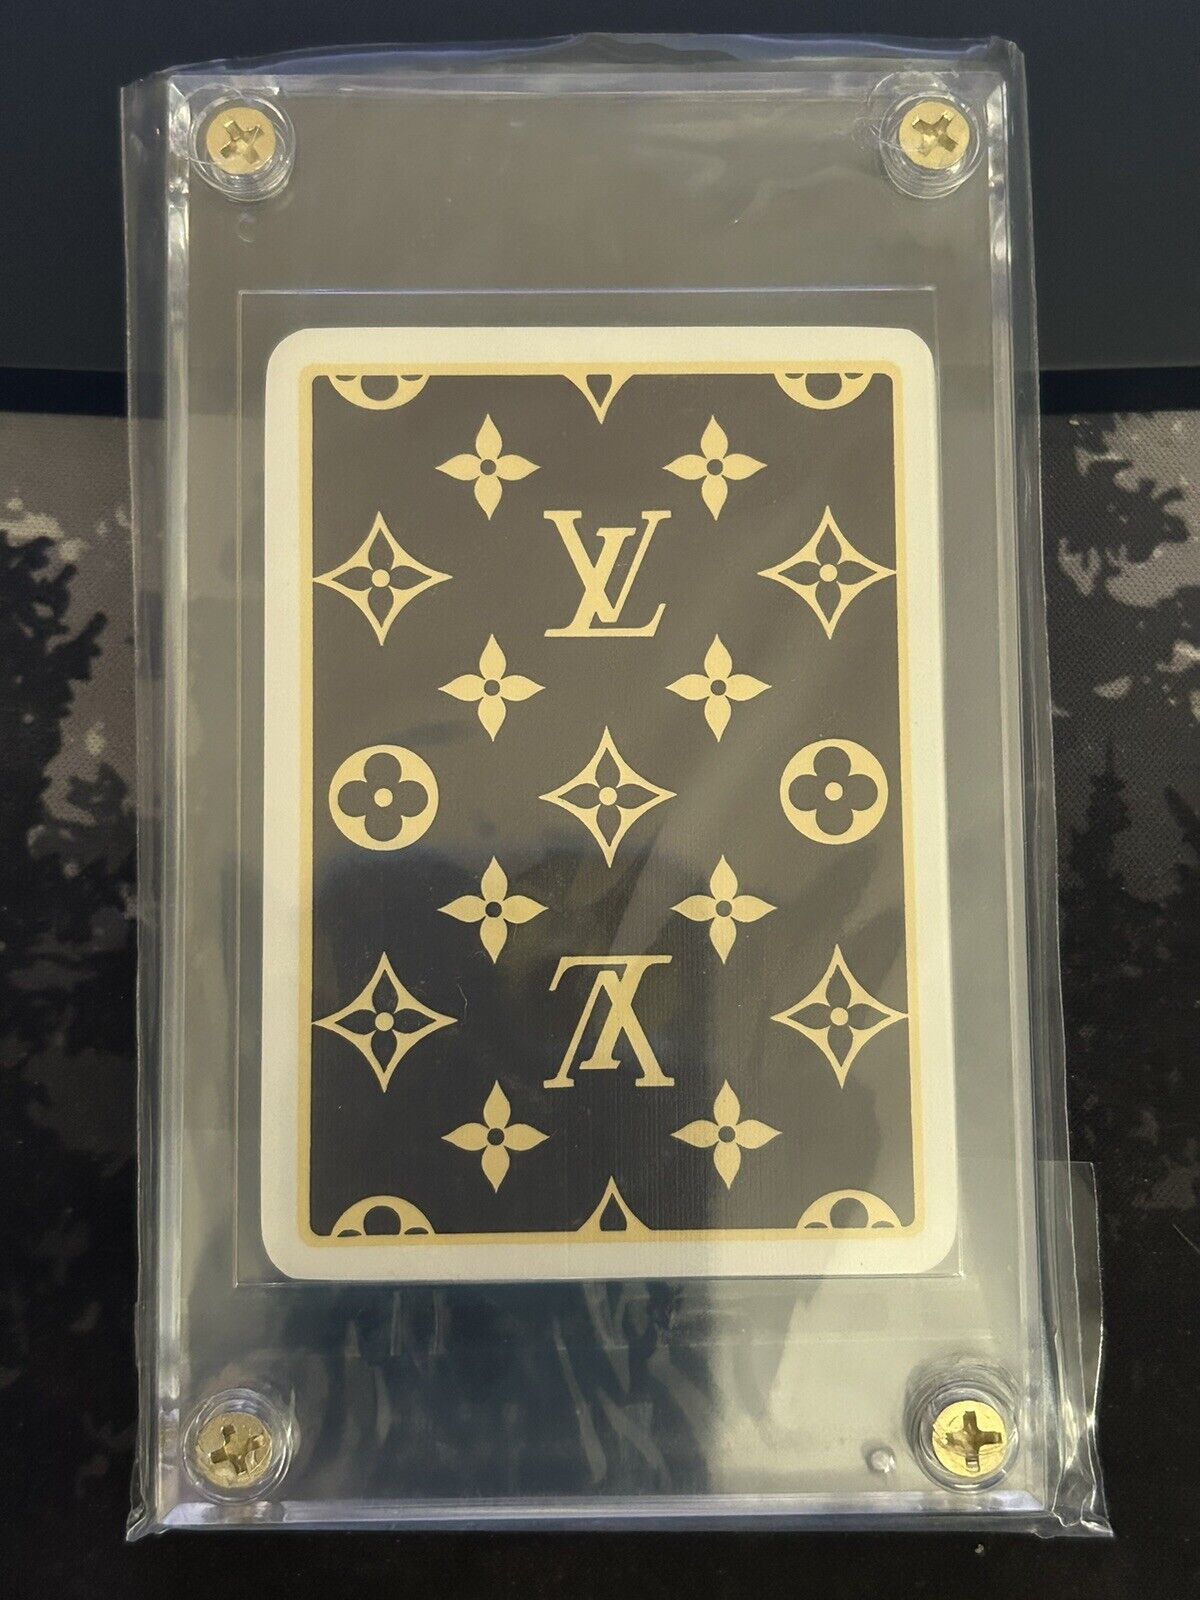 Authentic Louis Vuitton KING of CLUBS Playing Card with protective case